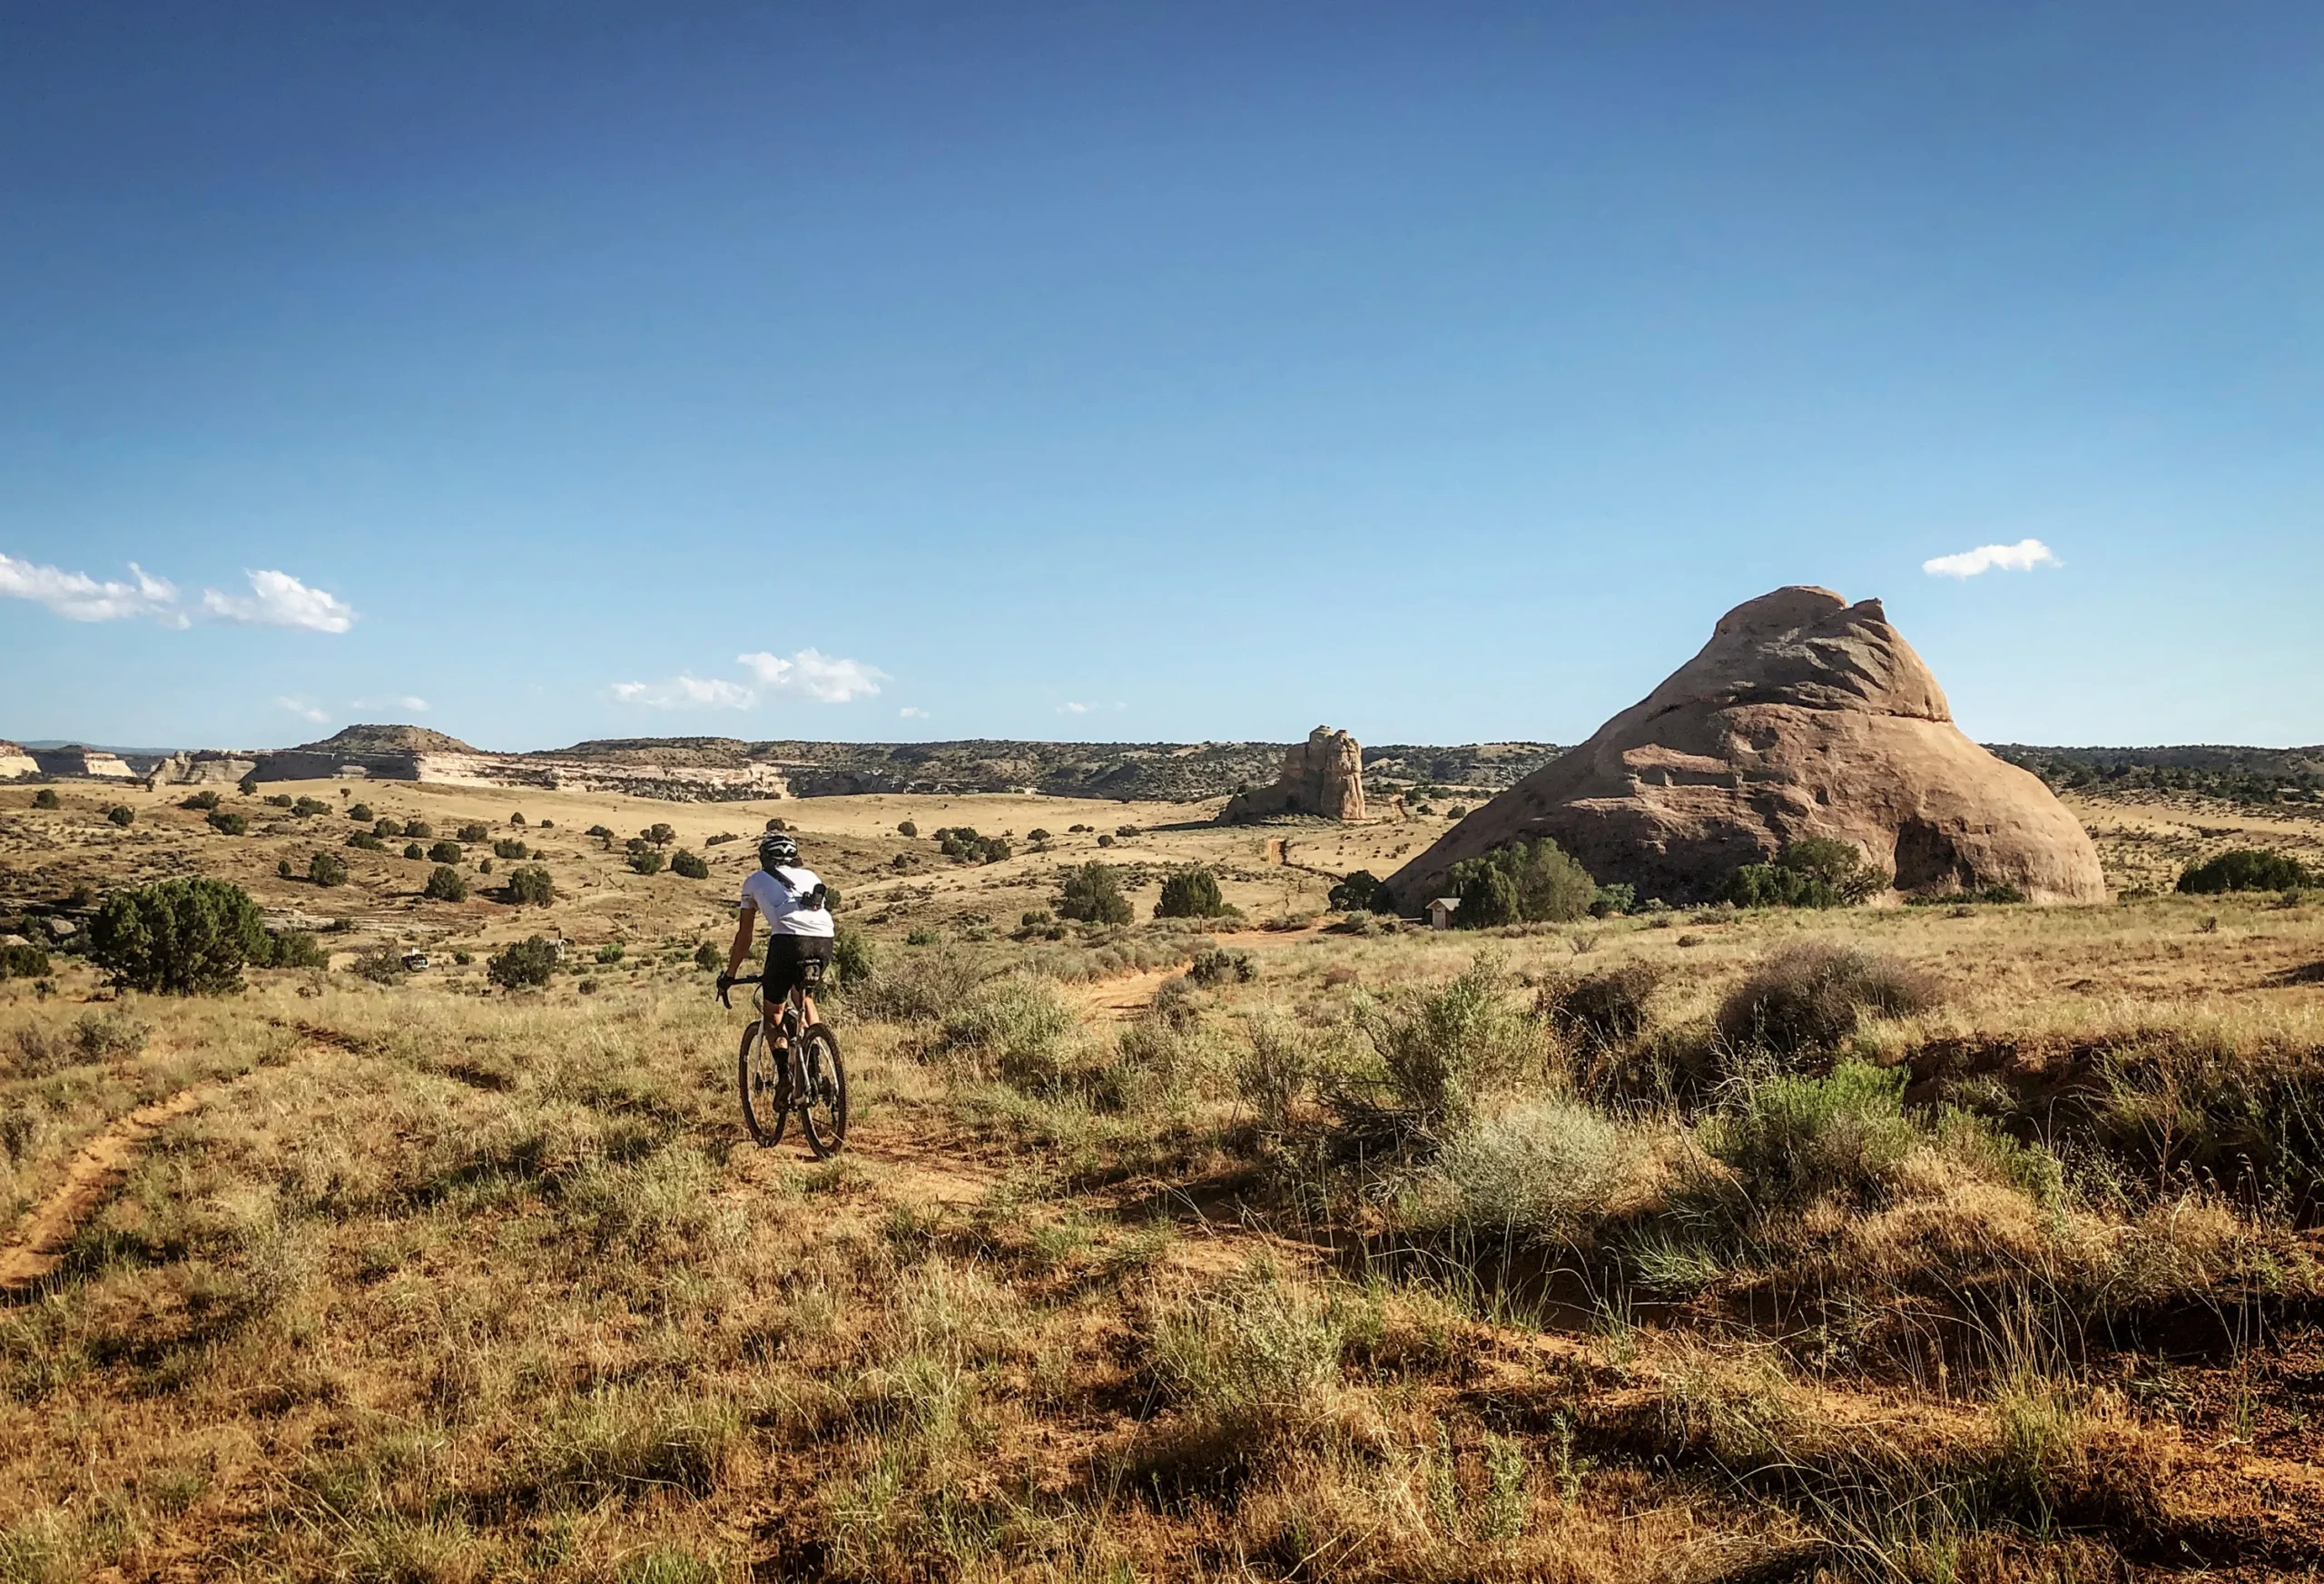 A cyclist rides along a desert gravel path on his Otso Cycles Waheela C. Rock formations surround the landscape. The sky is a bright blue, and the sun is shining.